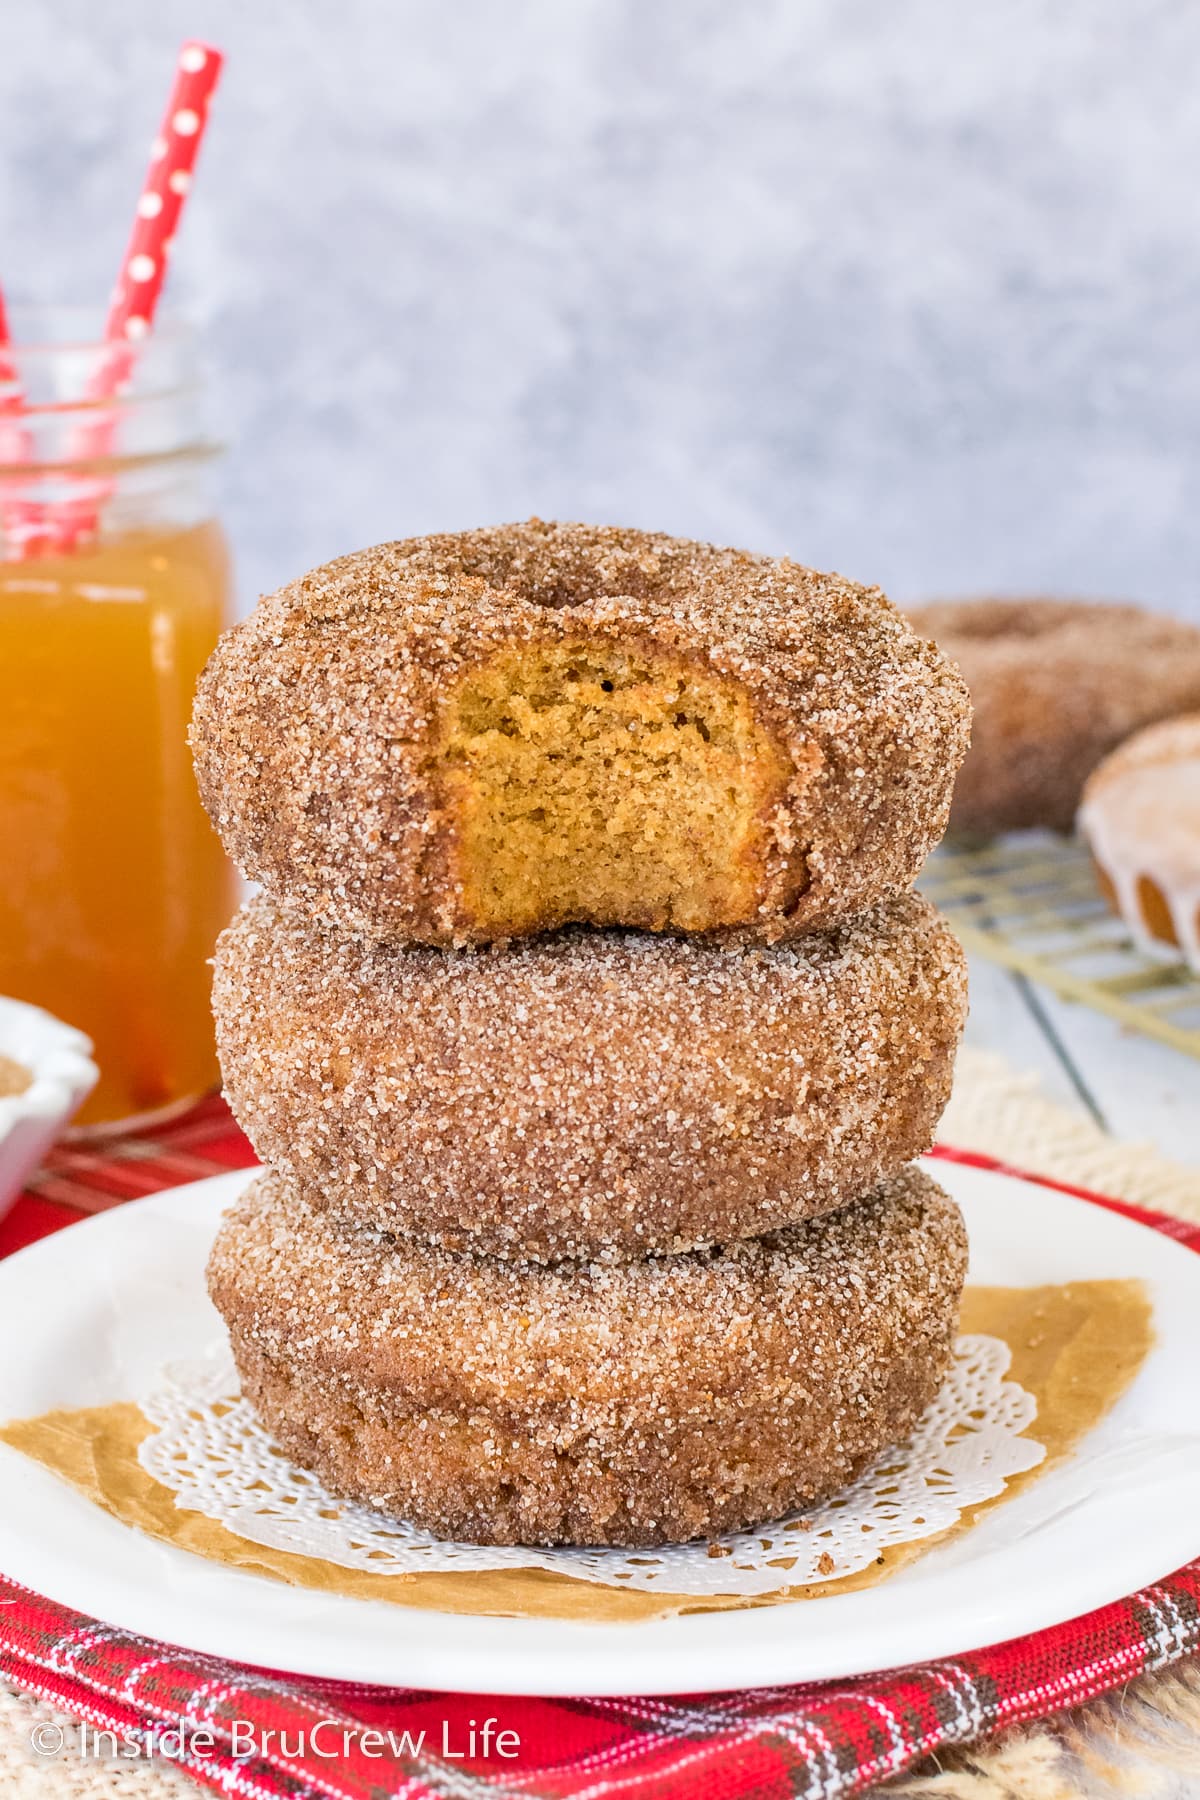 Three apple cider donuts stacked on a plate.